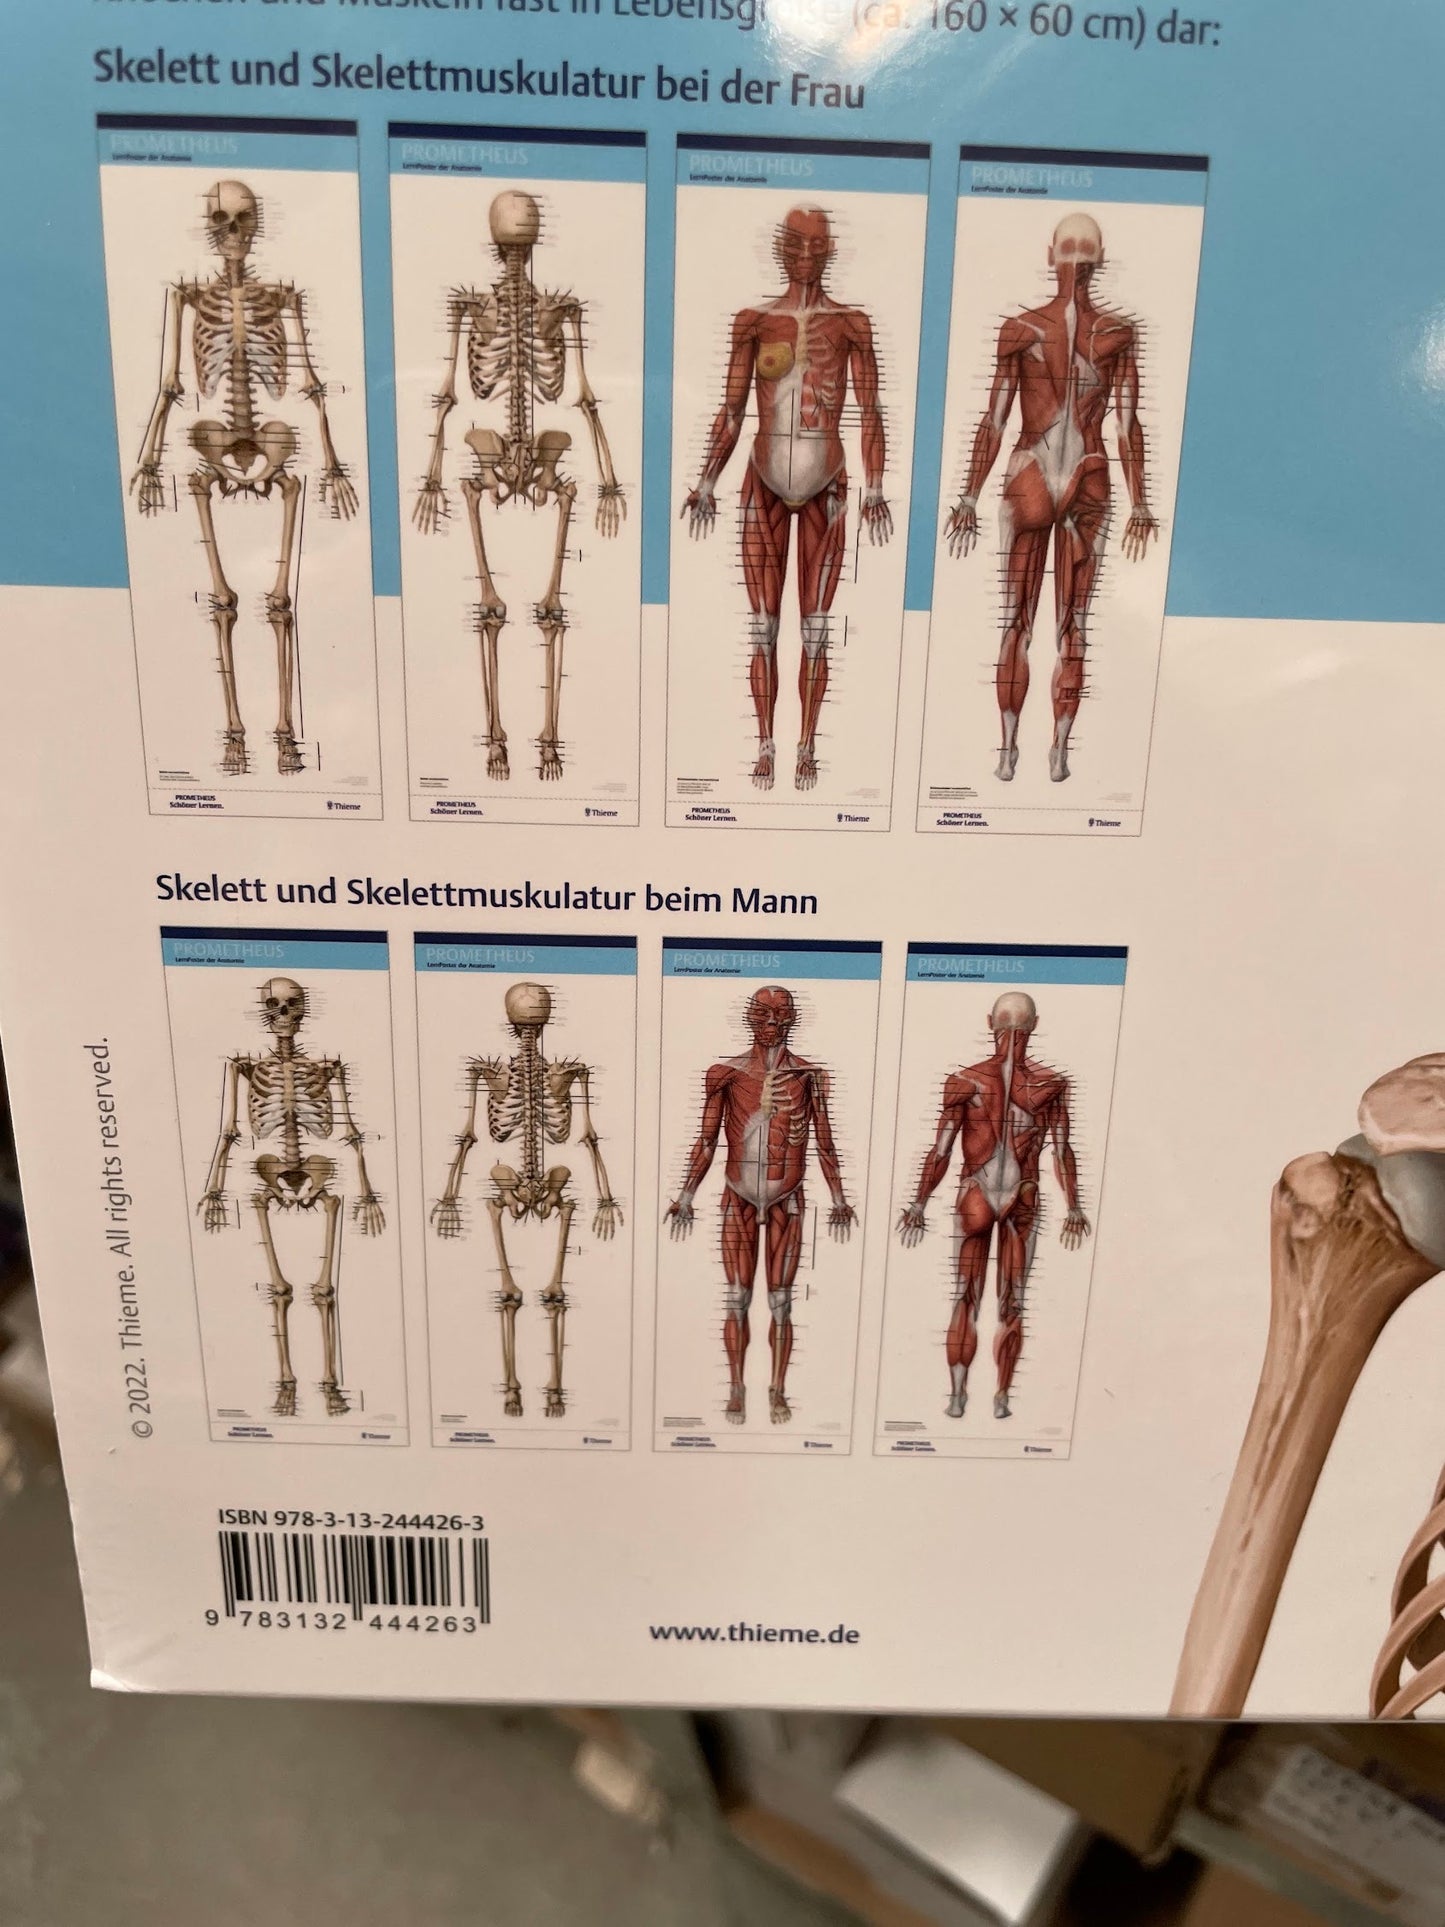 Large poster set with the skeleton and muscles of both male and female